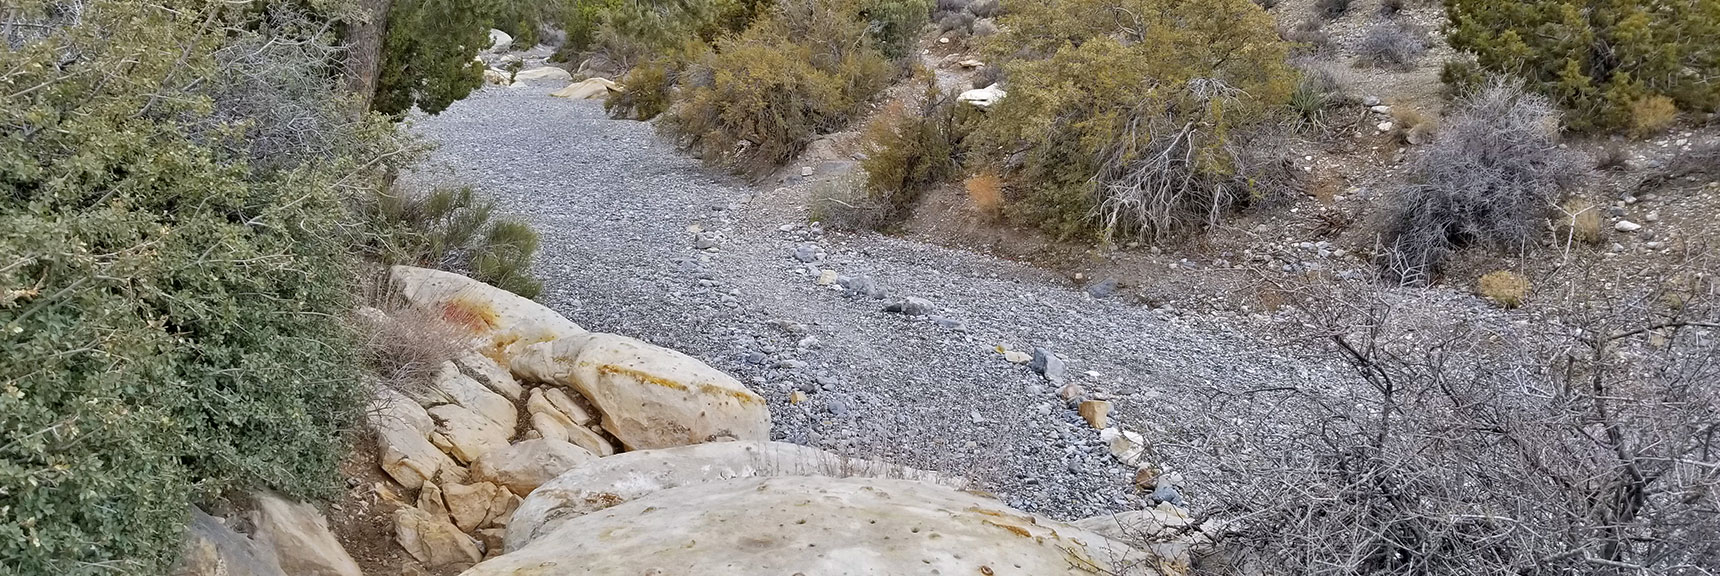 Crossing a Wash at White Rock Mountain Loop in Red Rock Park, Nevada